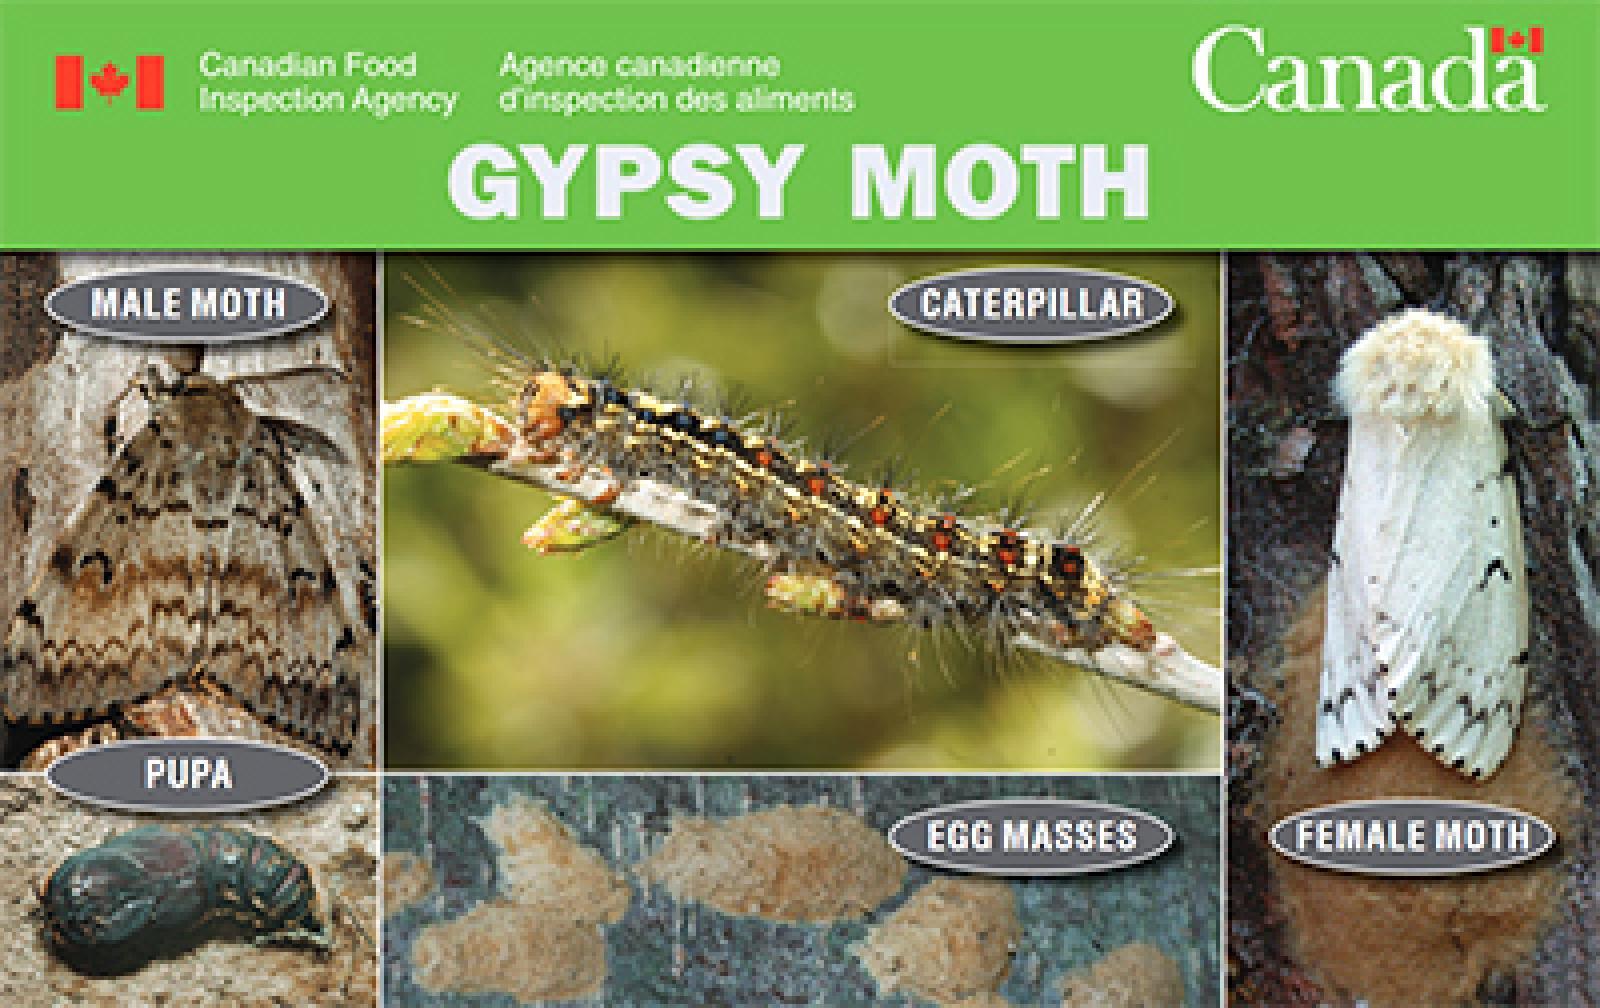 CFIA announces new Gypsy Moth Measures starting March 22, 2021